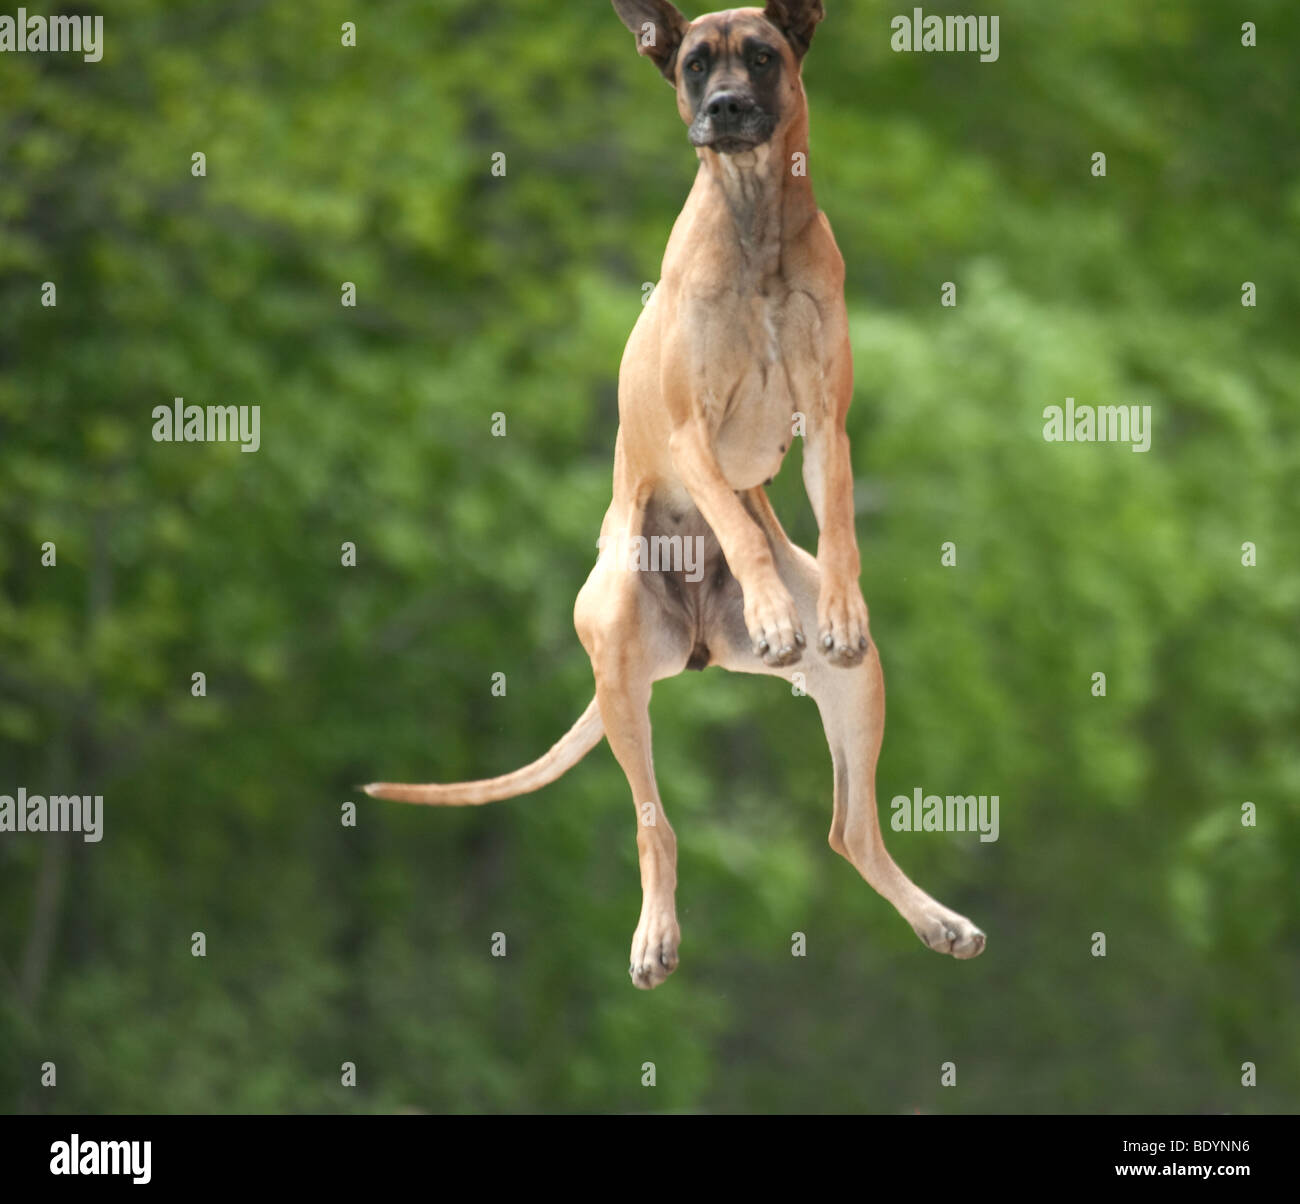 Great Dane dog leaping into air with excitement Stock Photo